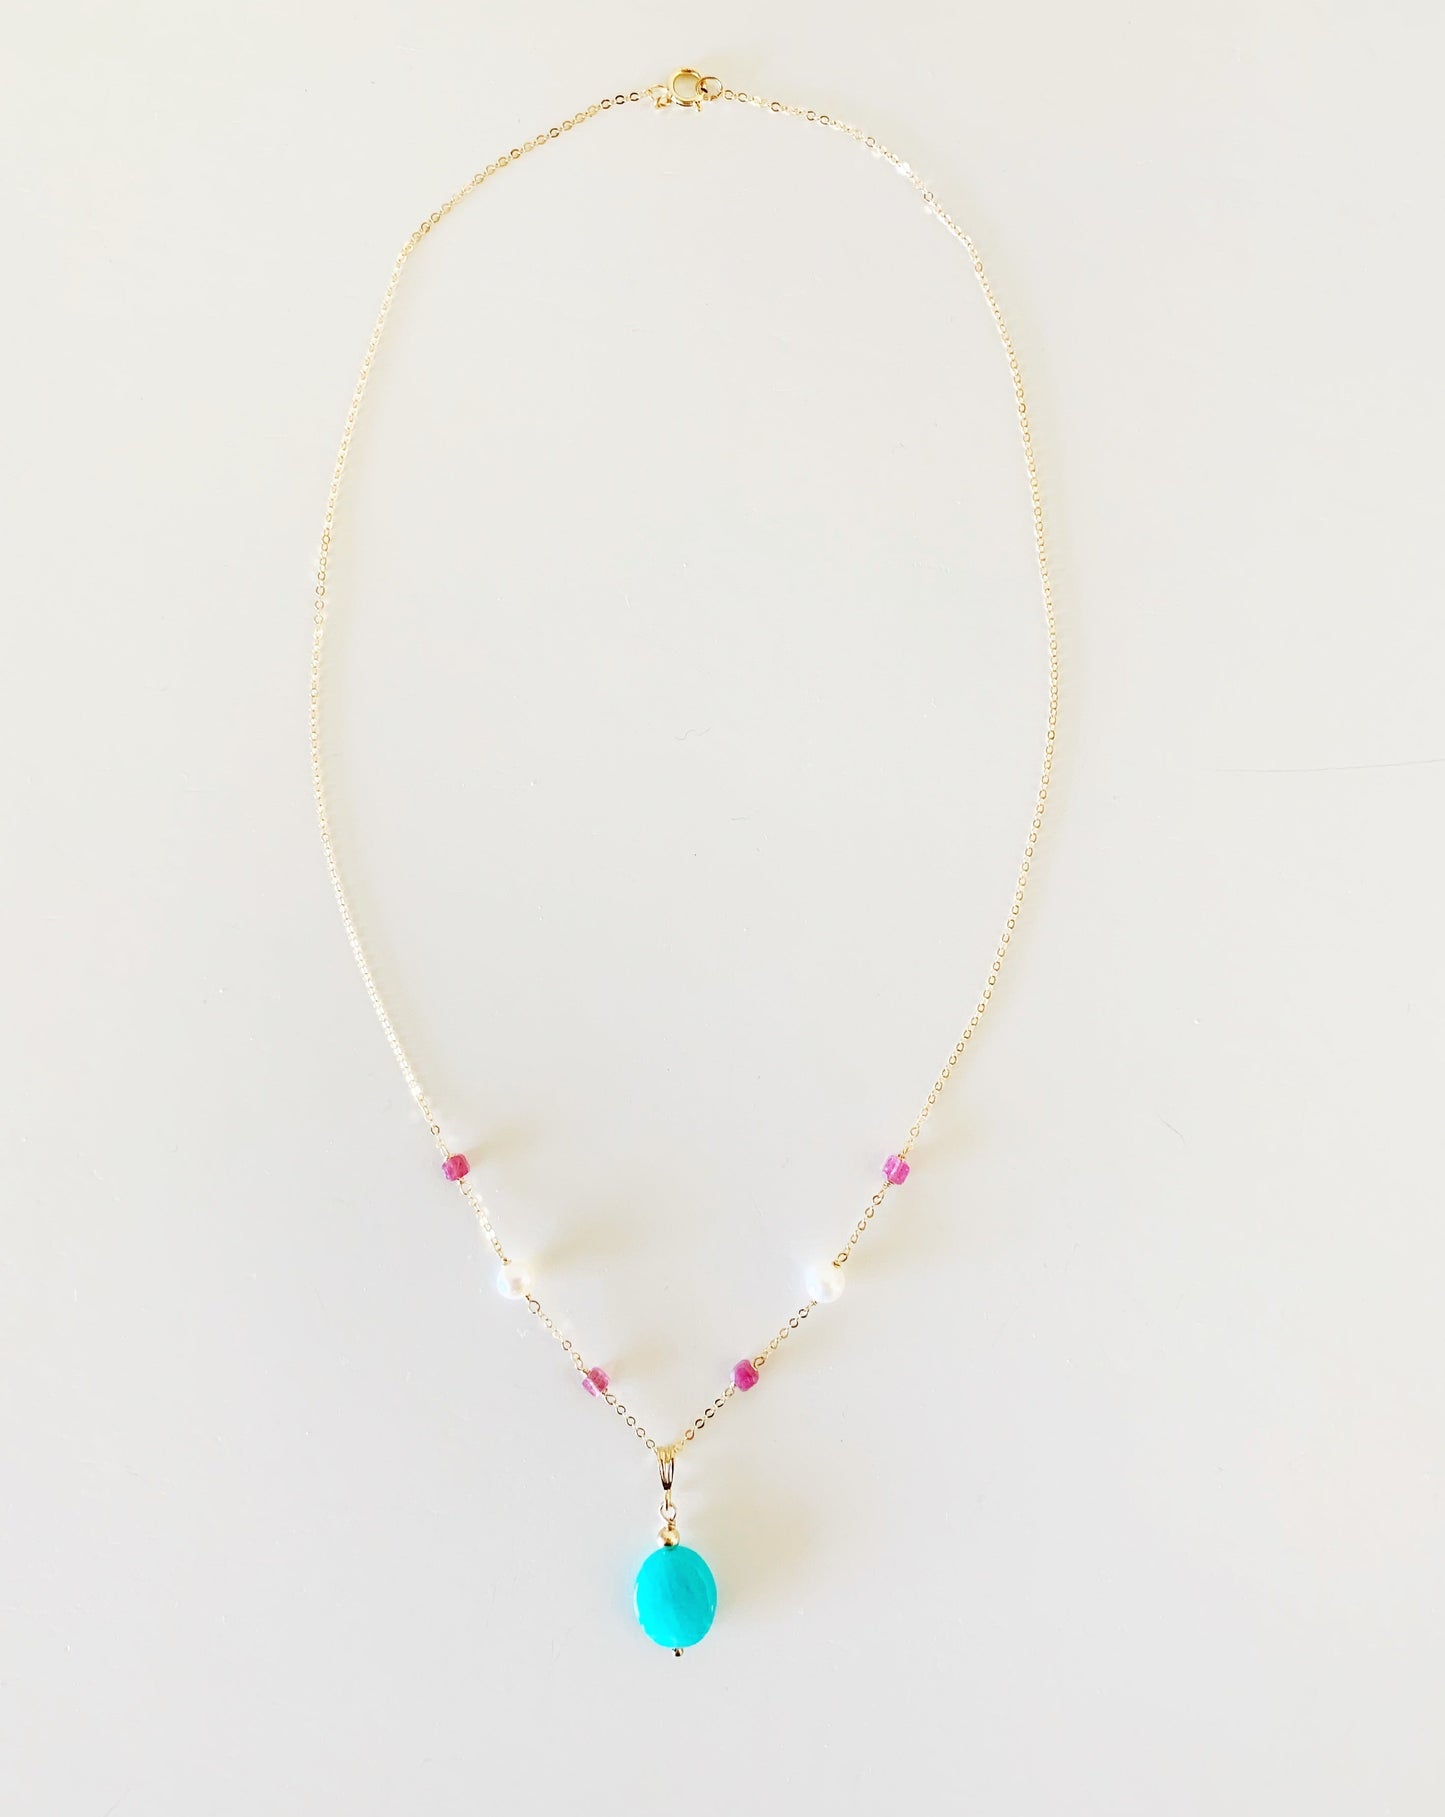 the harwich port necklace by mermaids and madeleines is a pendant style necklace with a bright amazonite stone suspended from 14k gold filled chain with tourmaline and freshwater pearl on the chain. this necklace is in full view and photogrpahed on a white surface